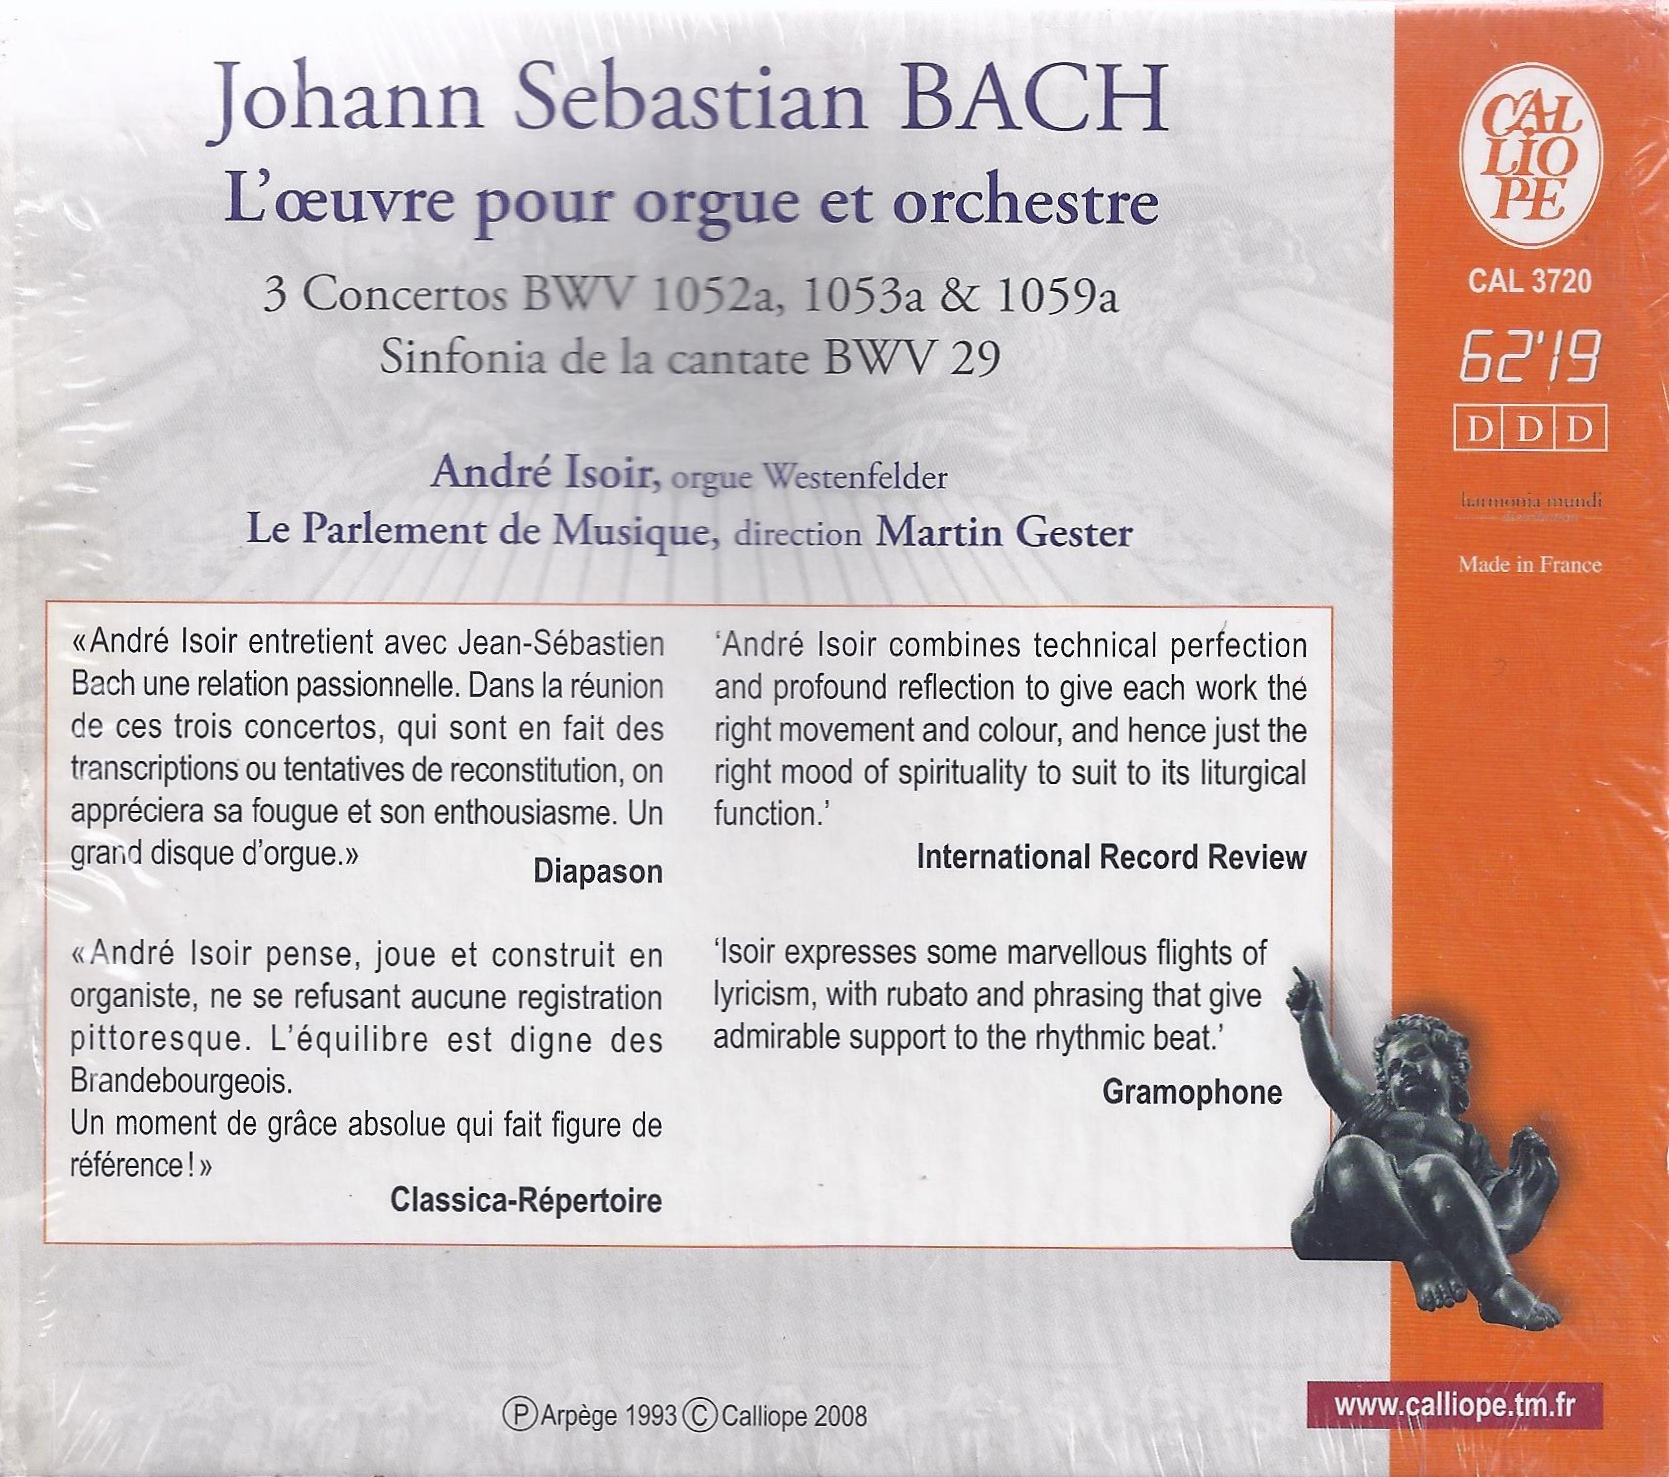 Bach: Works for organ & orchestra  - slide-1